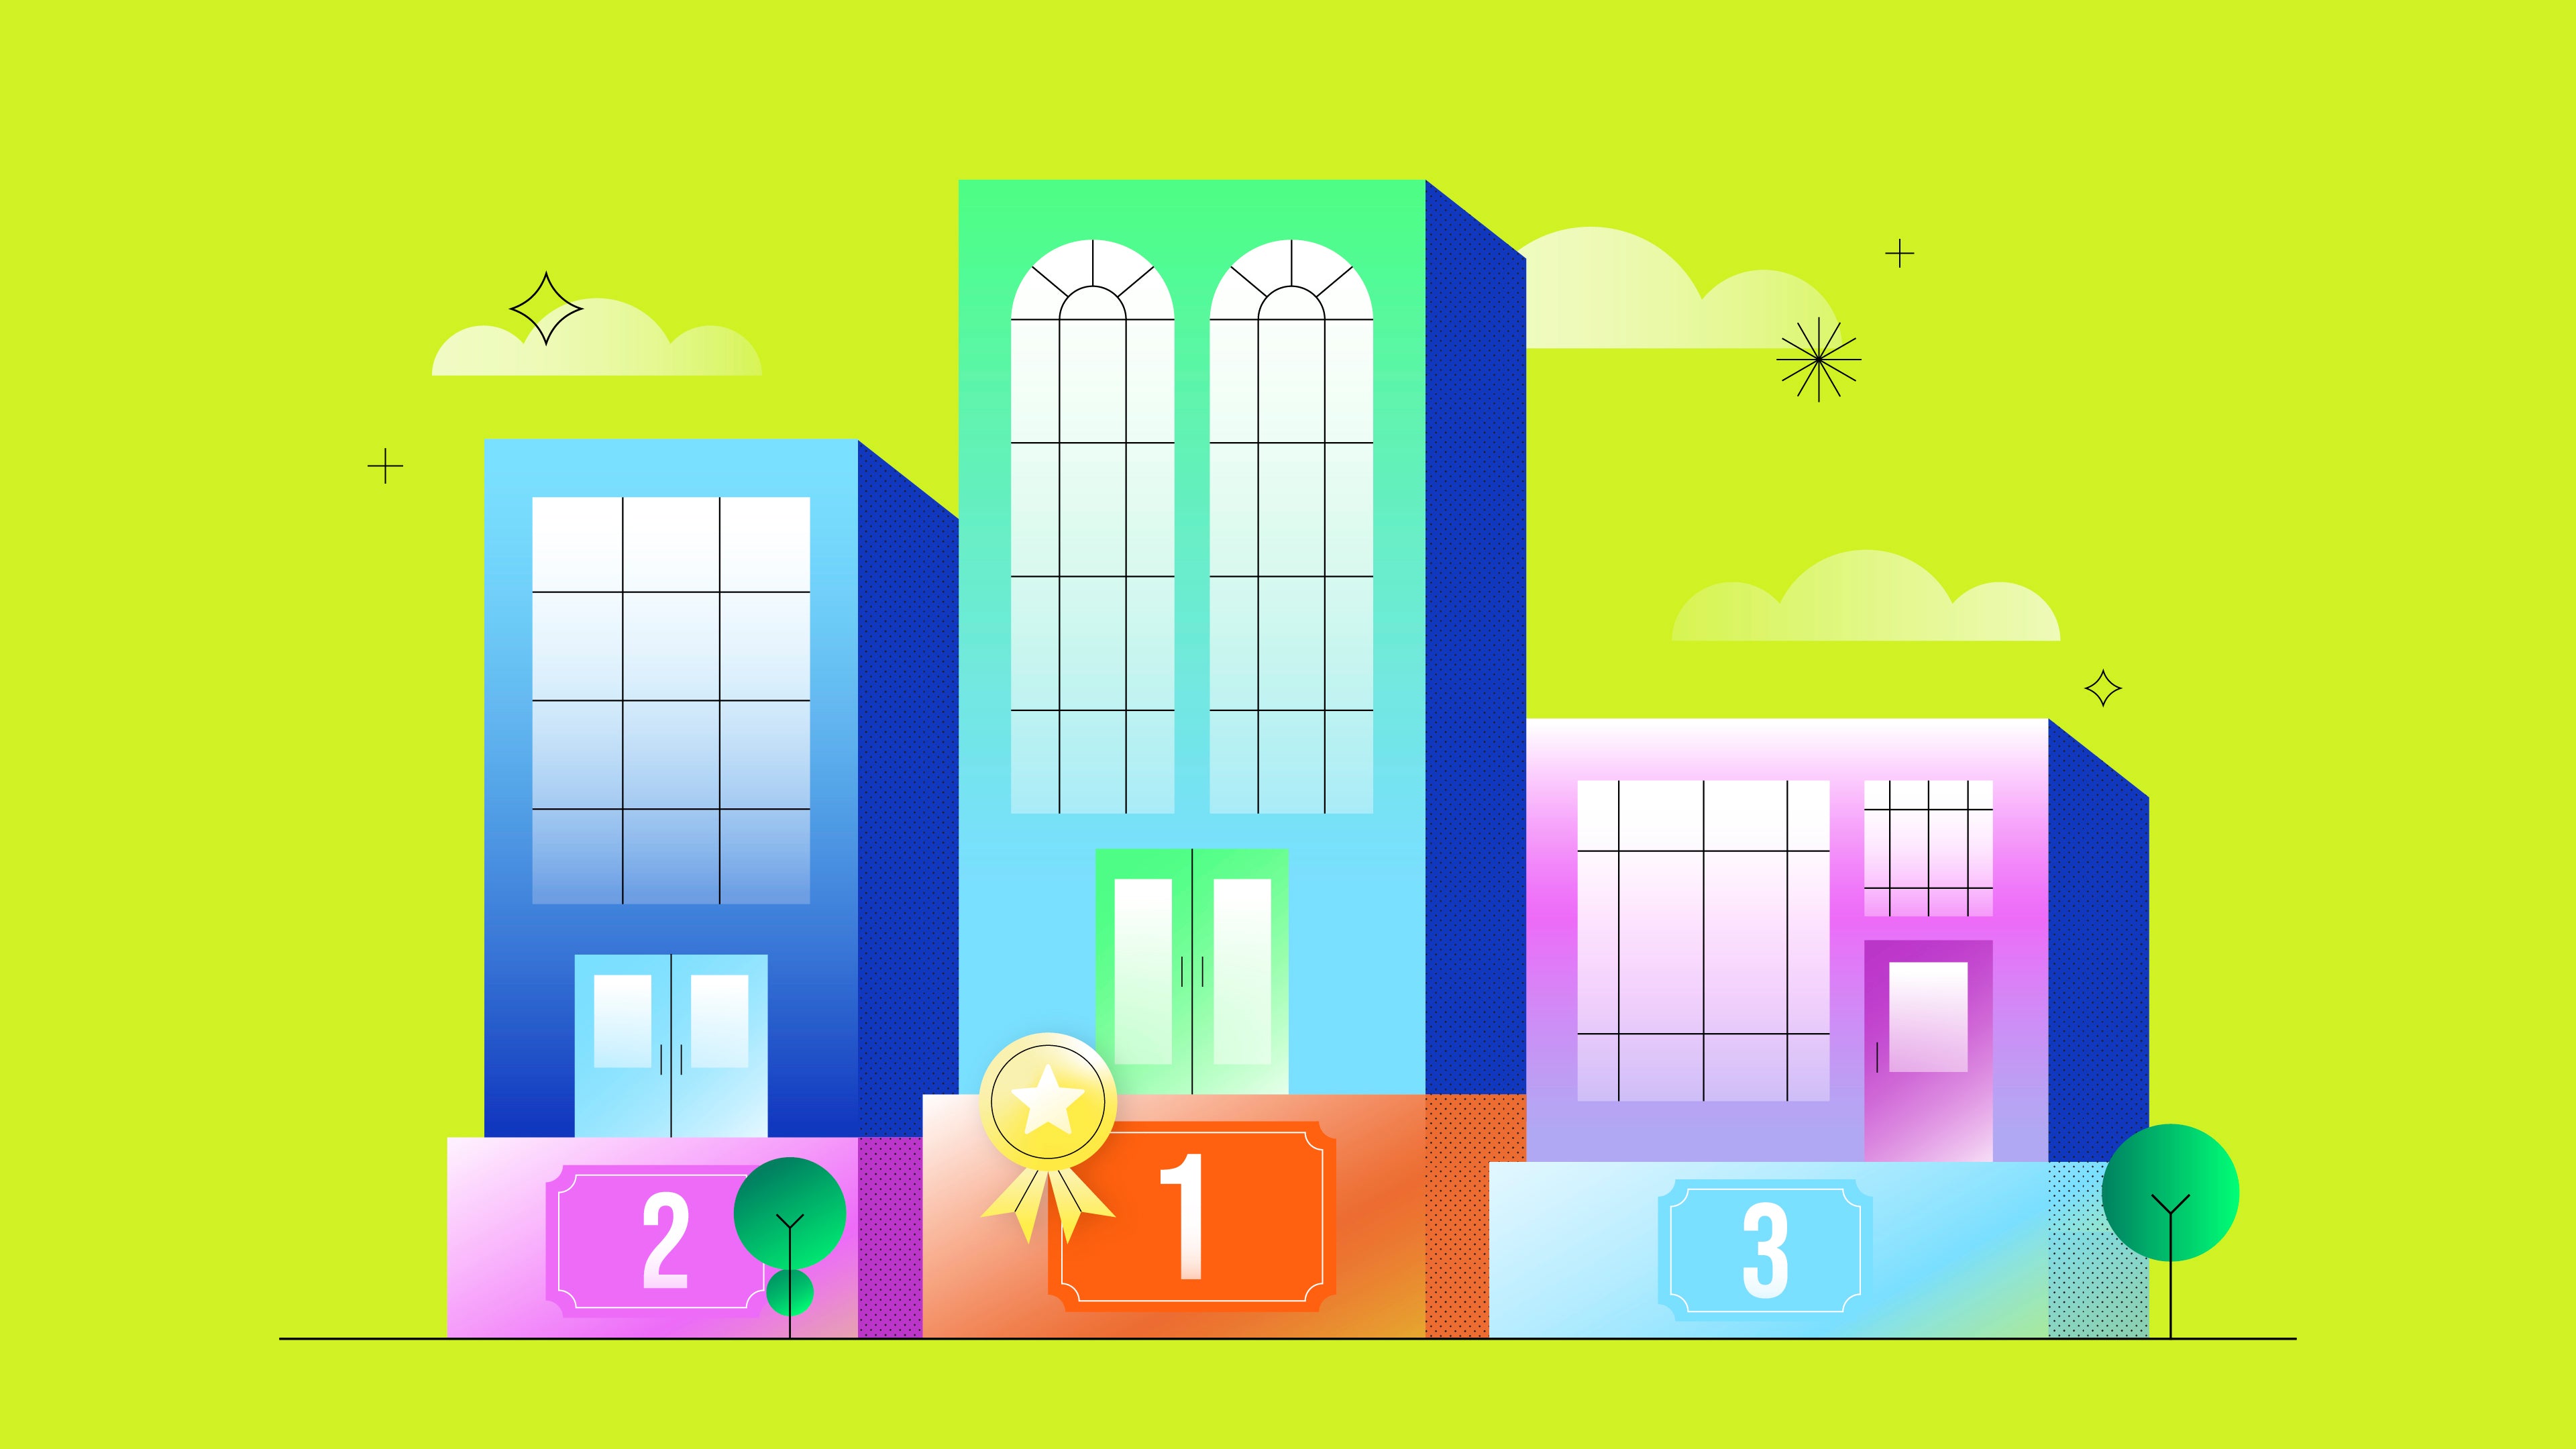 A colorful abstract image with three different buildings on a numbered podium, similar to an Olympic medal podium.